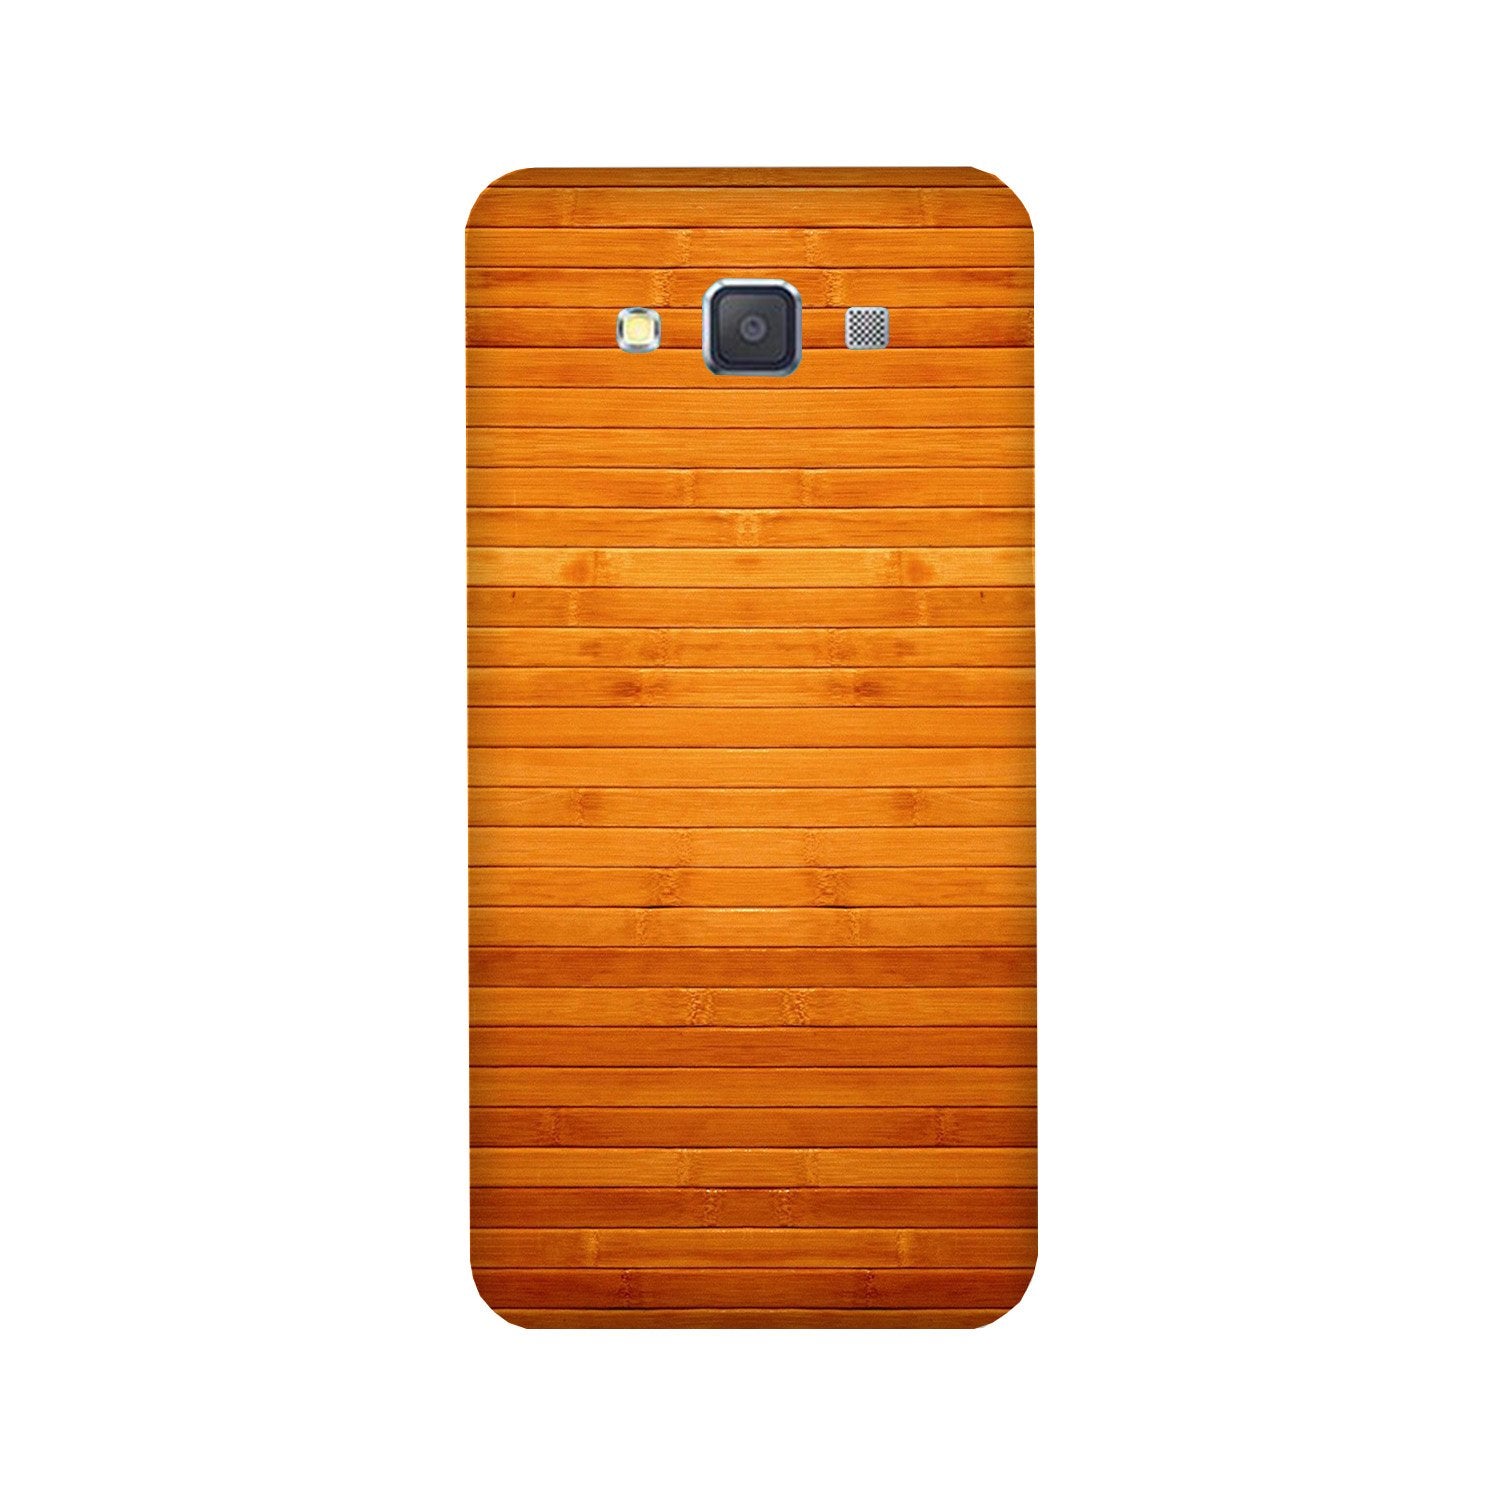 Wooden Look Case for Galaxy Grand Max(Design - 111)